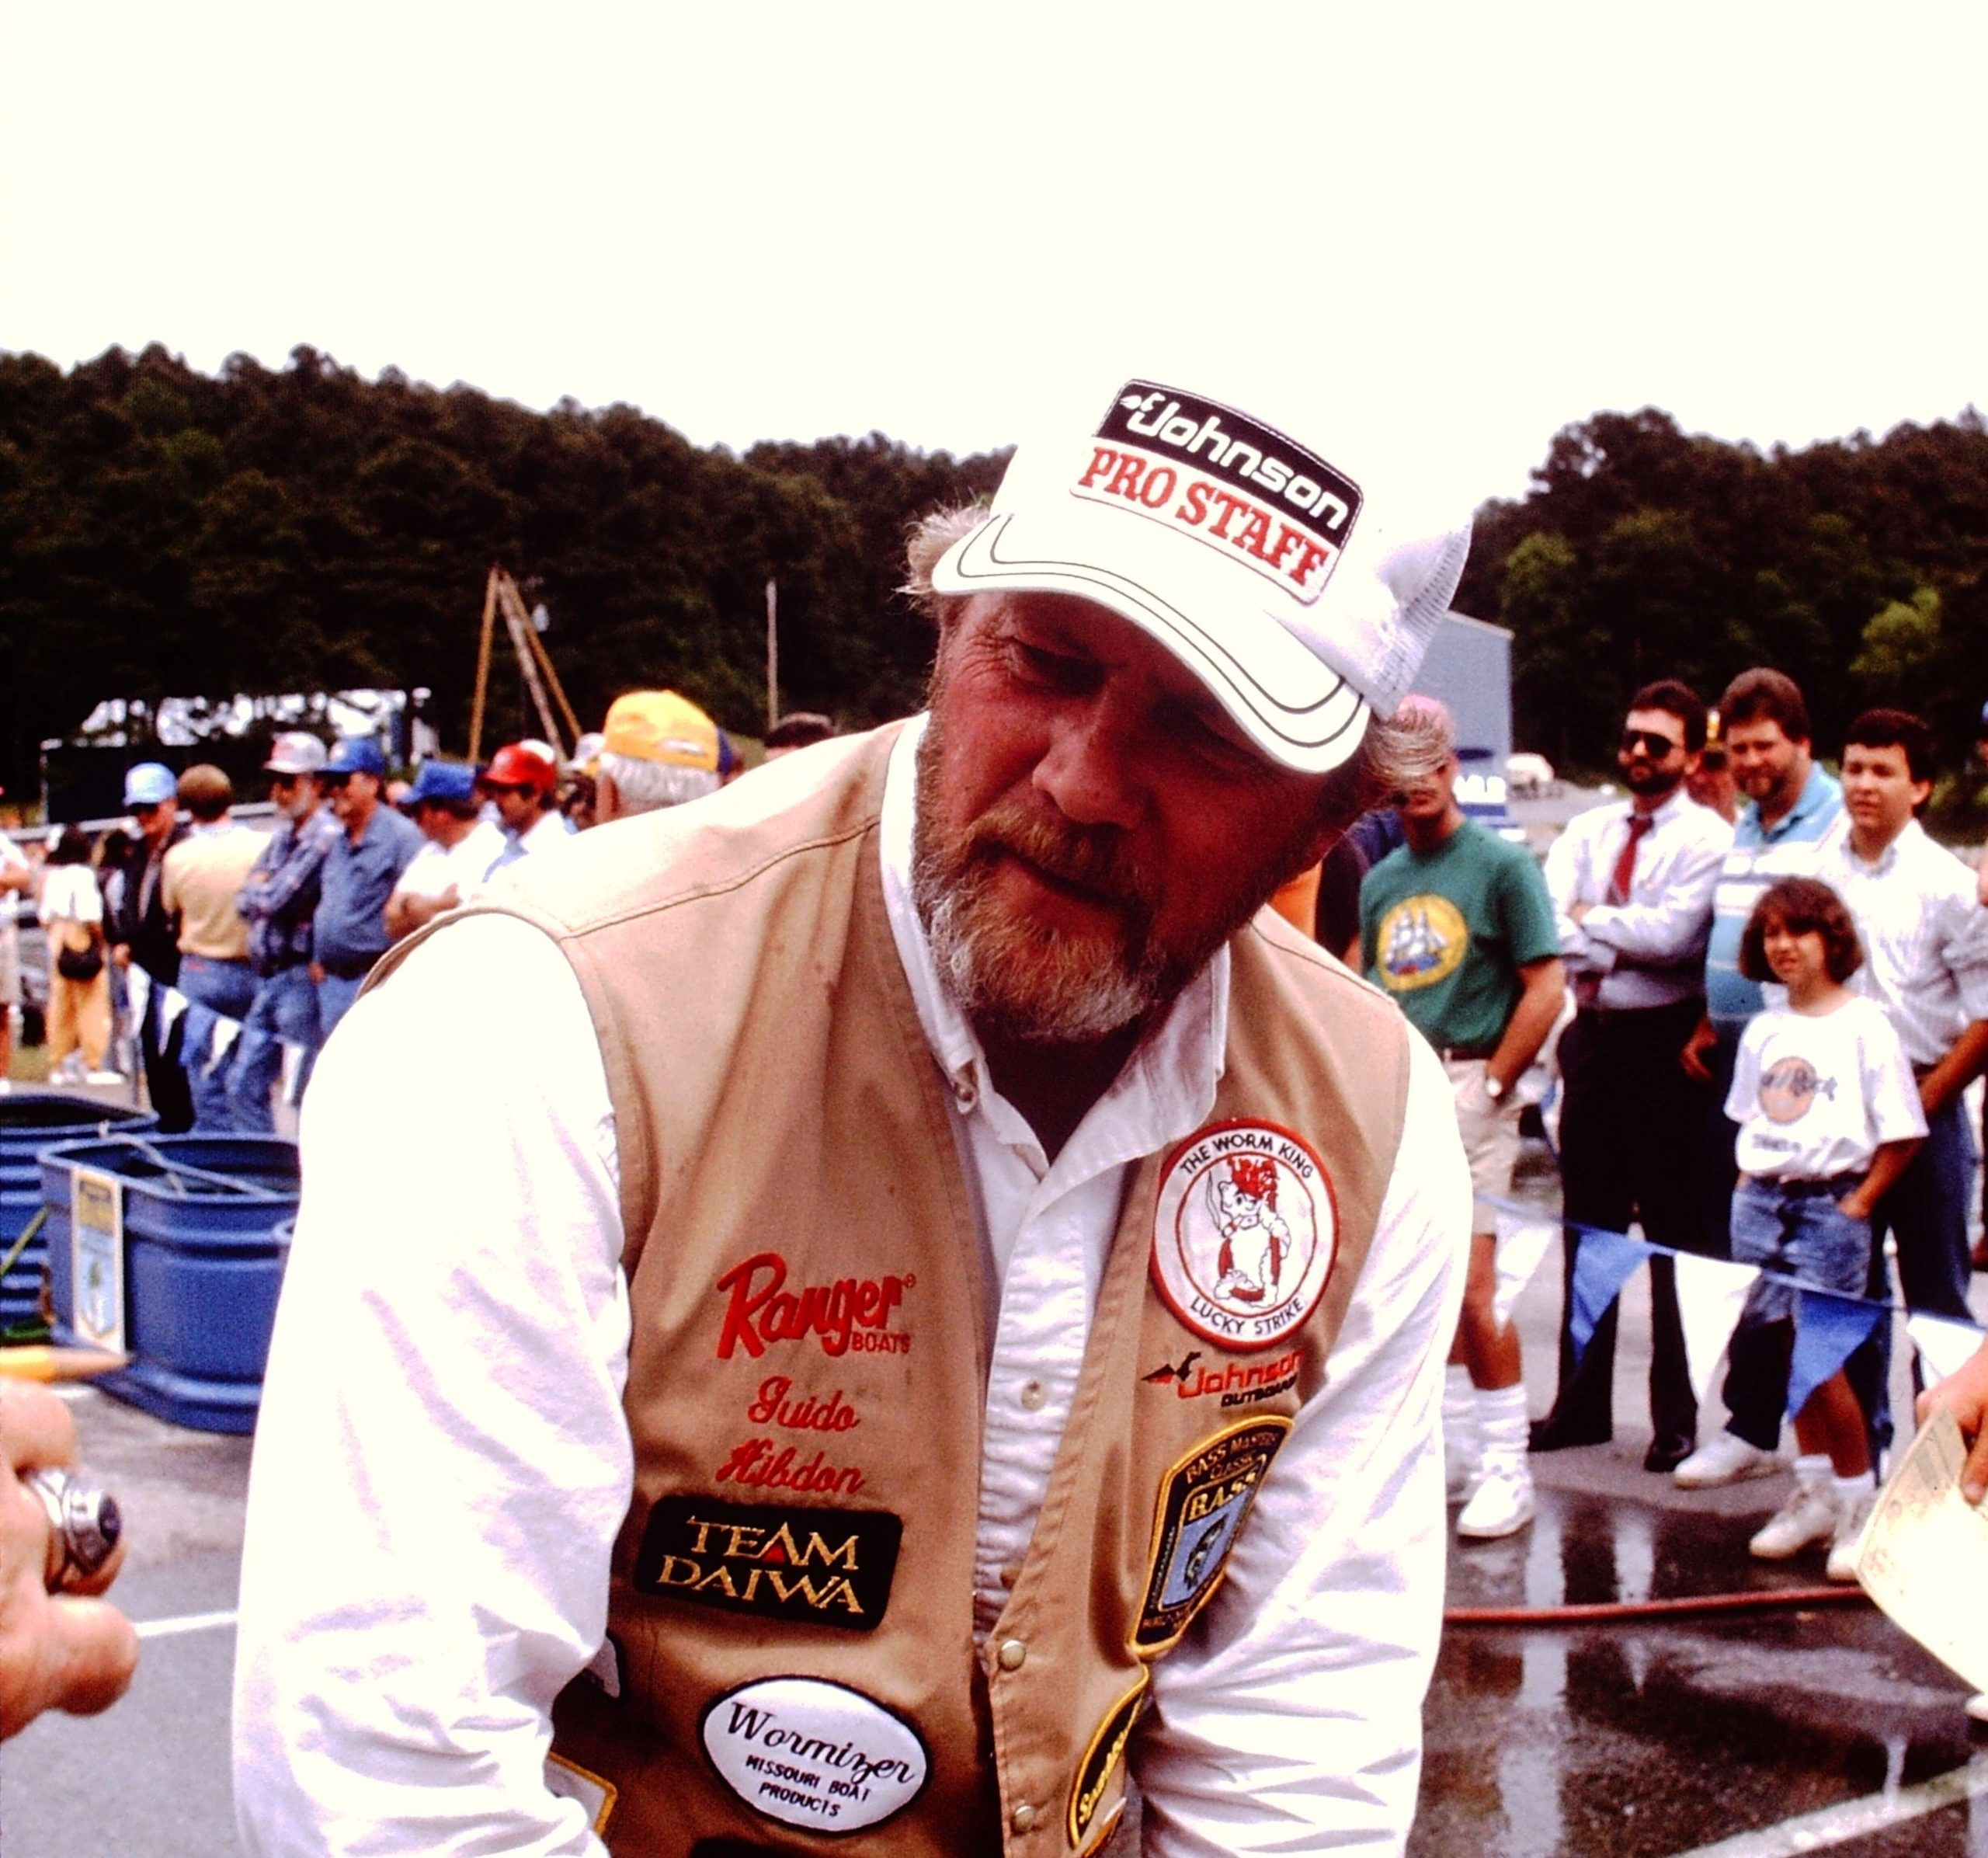 Guido Hibdon finished in 10th place, and his weight was enough for him to secure the 1990 Bassmaster Angler of the Year award after a strong season, the first of two back-to-back AOY titles for him. He was awarded the prize at the Chickamauga event. He already owned a Classic championship from two years prior.